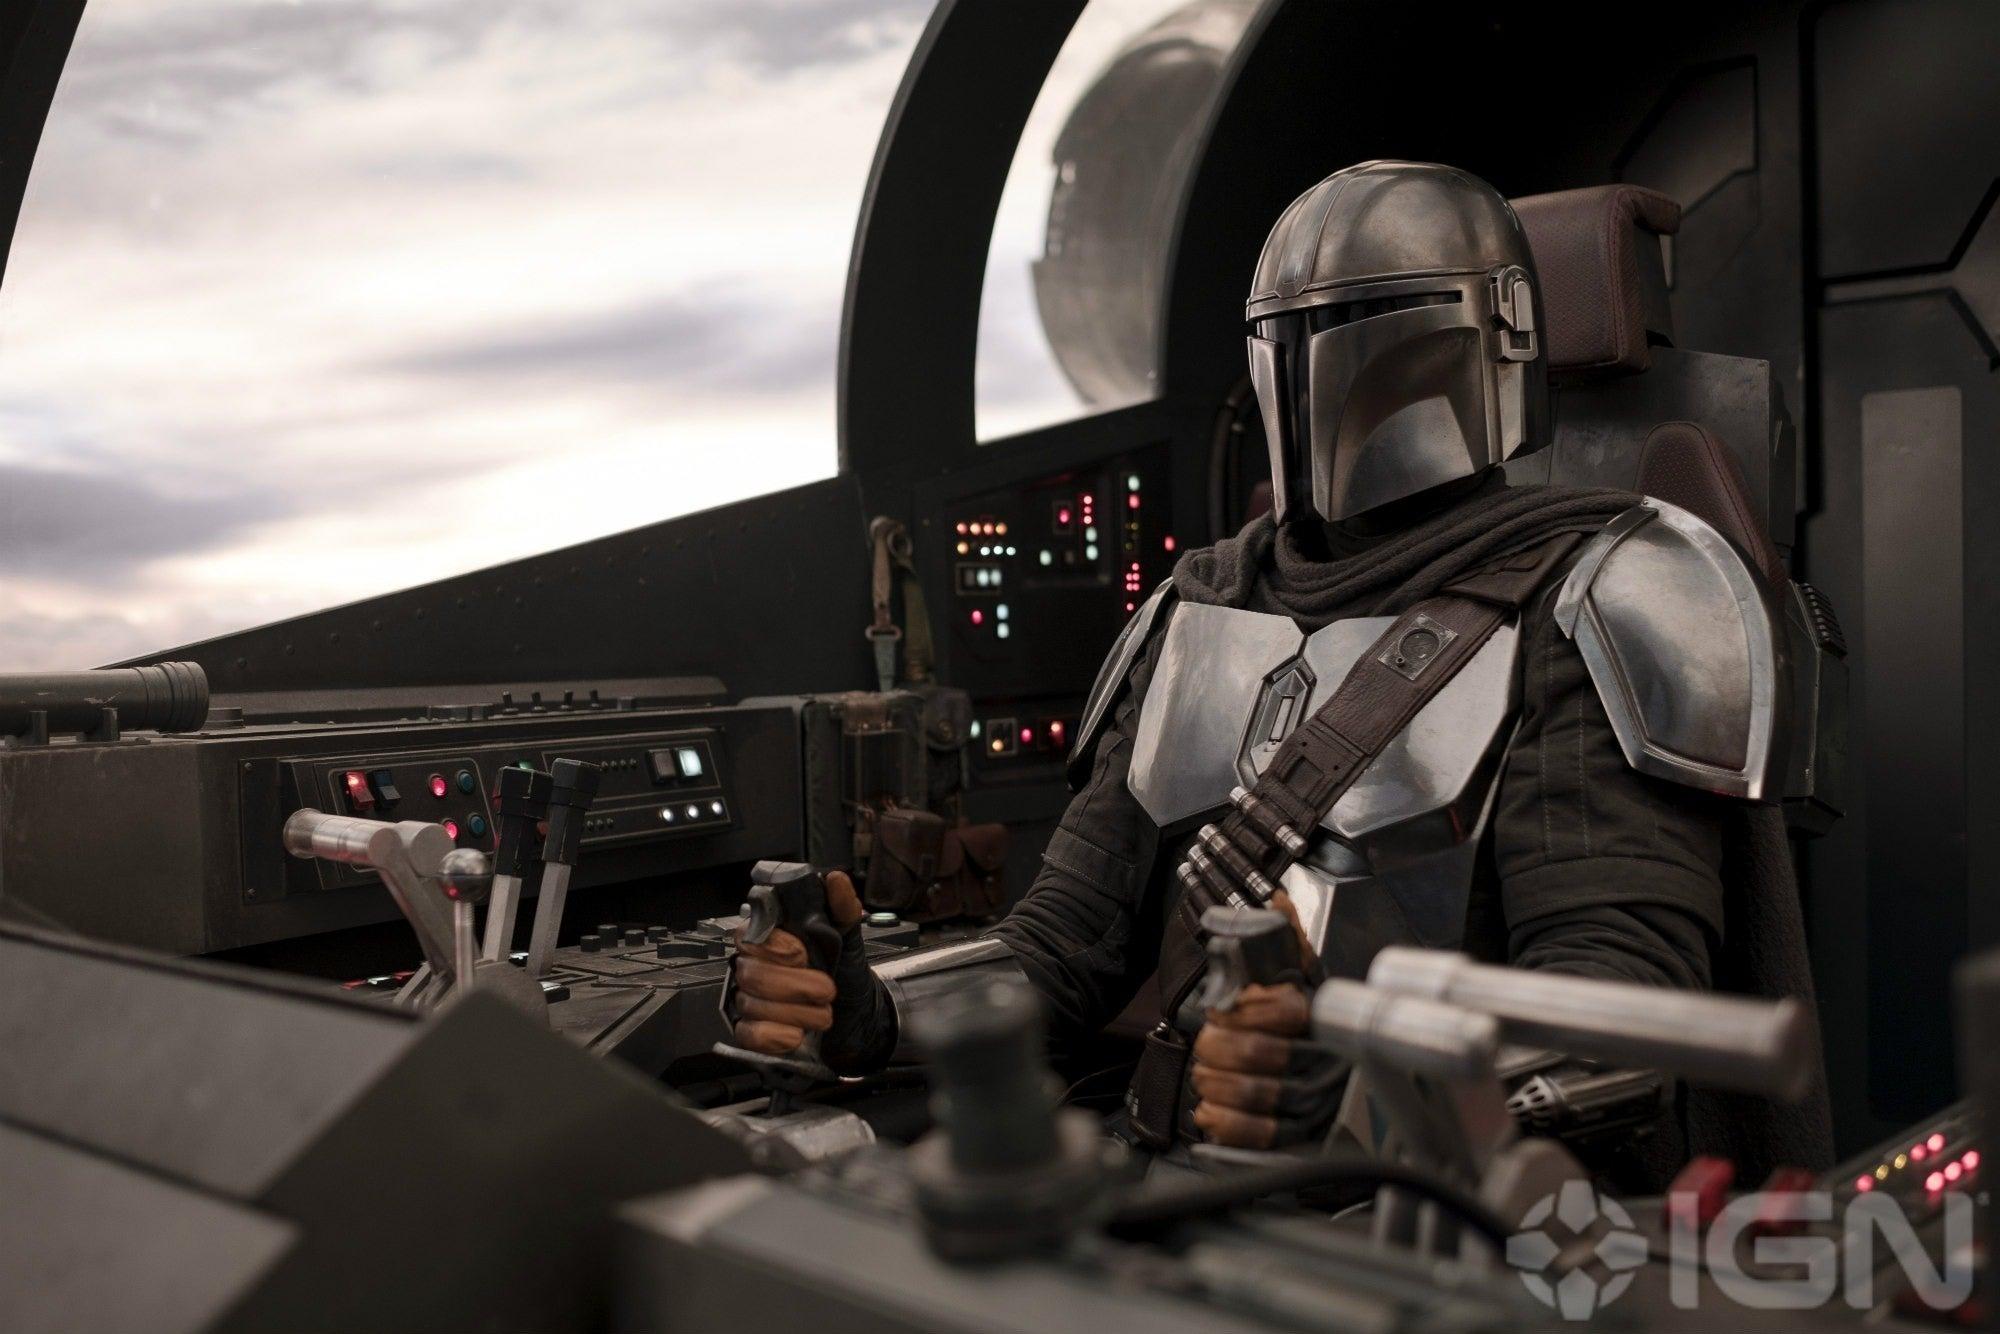 The Mandalorian: 12 New Image From the Disney+ Star Wars